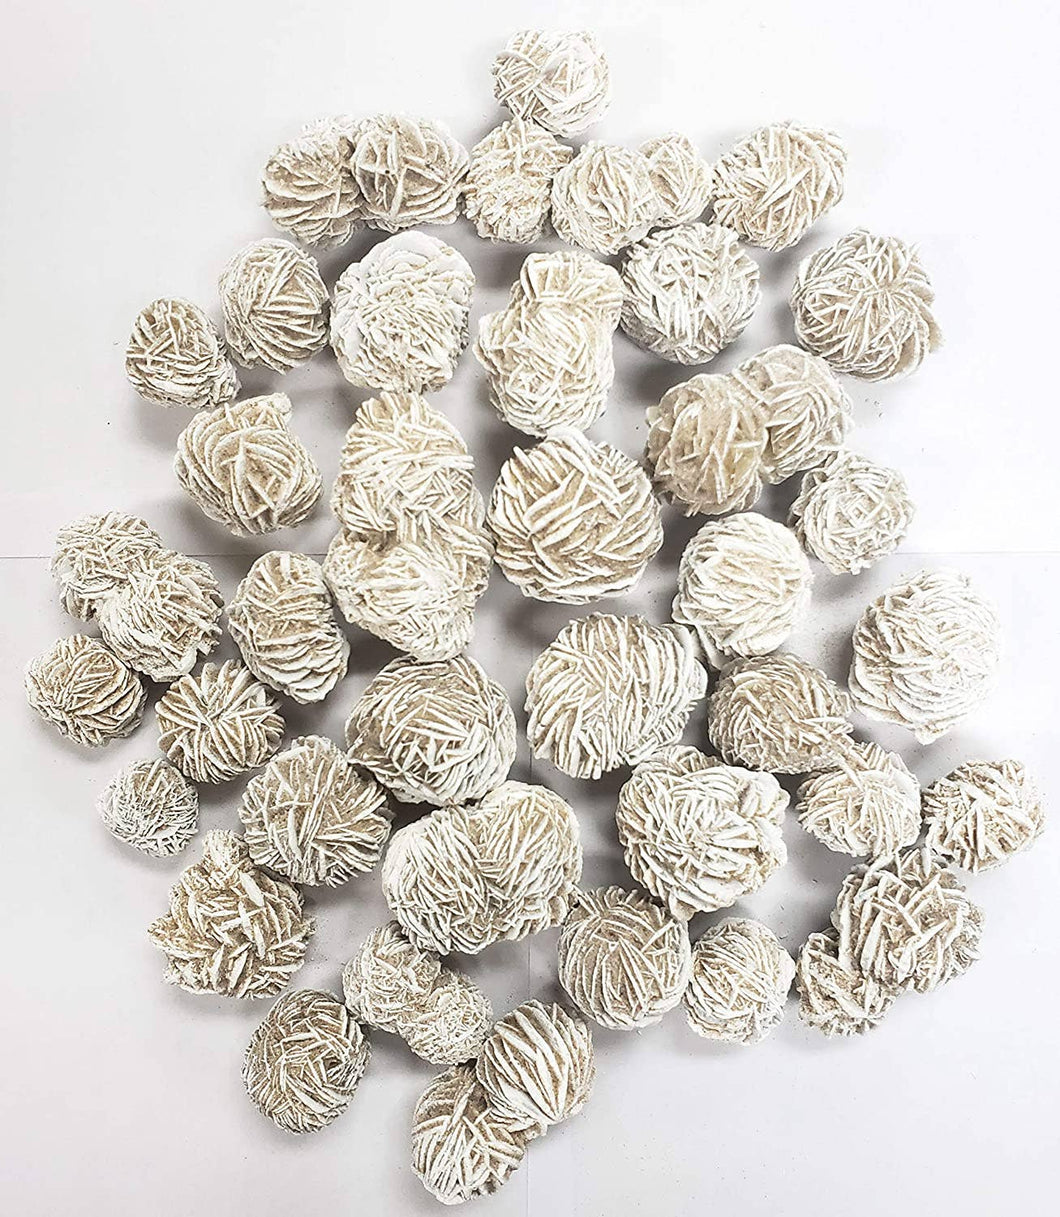 Embrace Transformation with Desert Rose Selenite - Clarity, Energy Cleansing, and Inner Truth